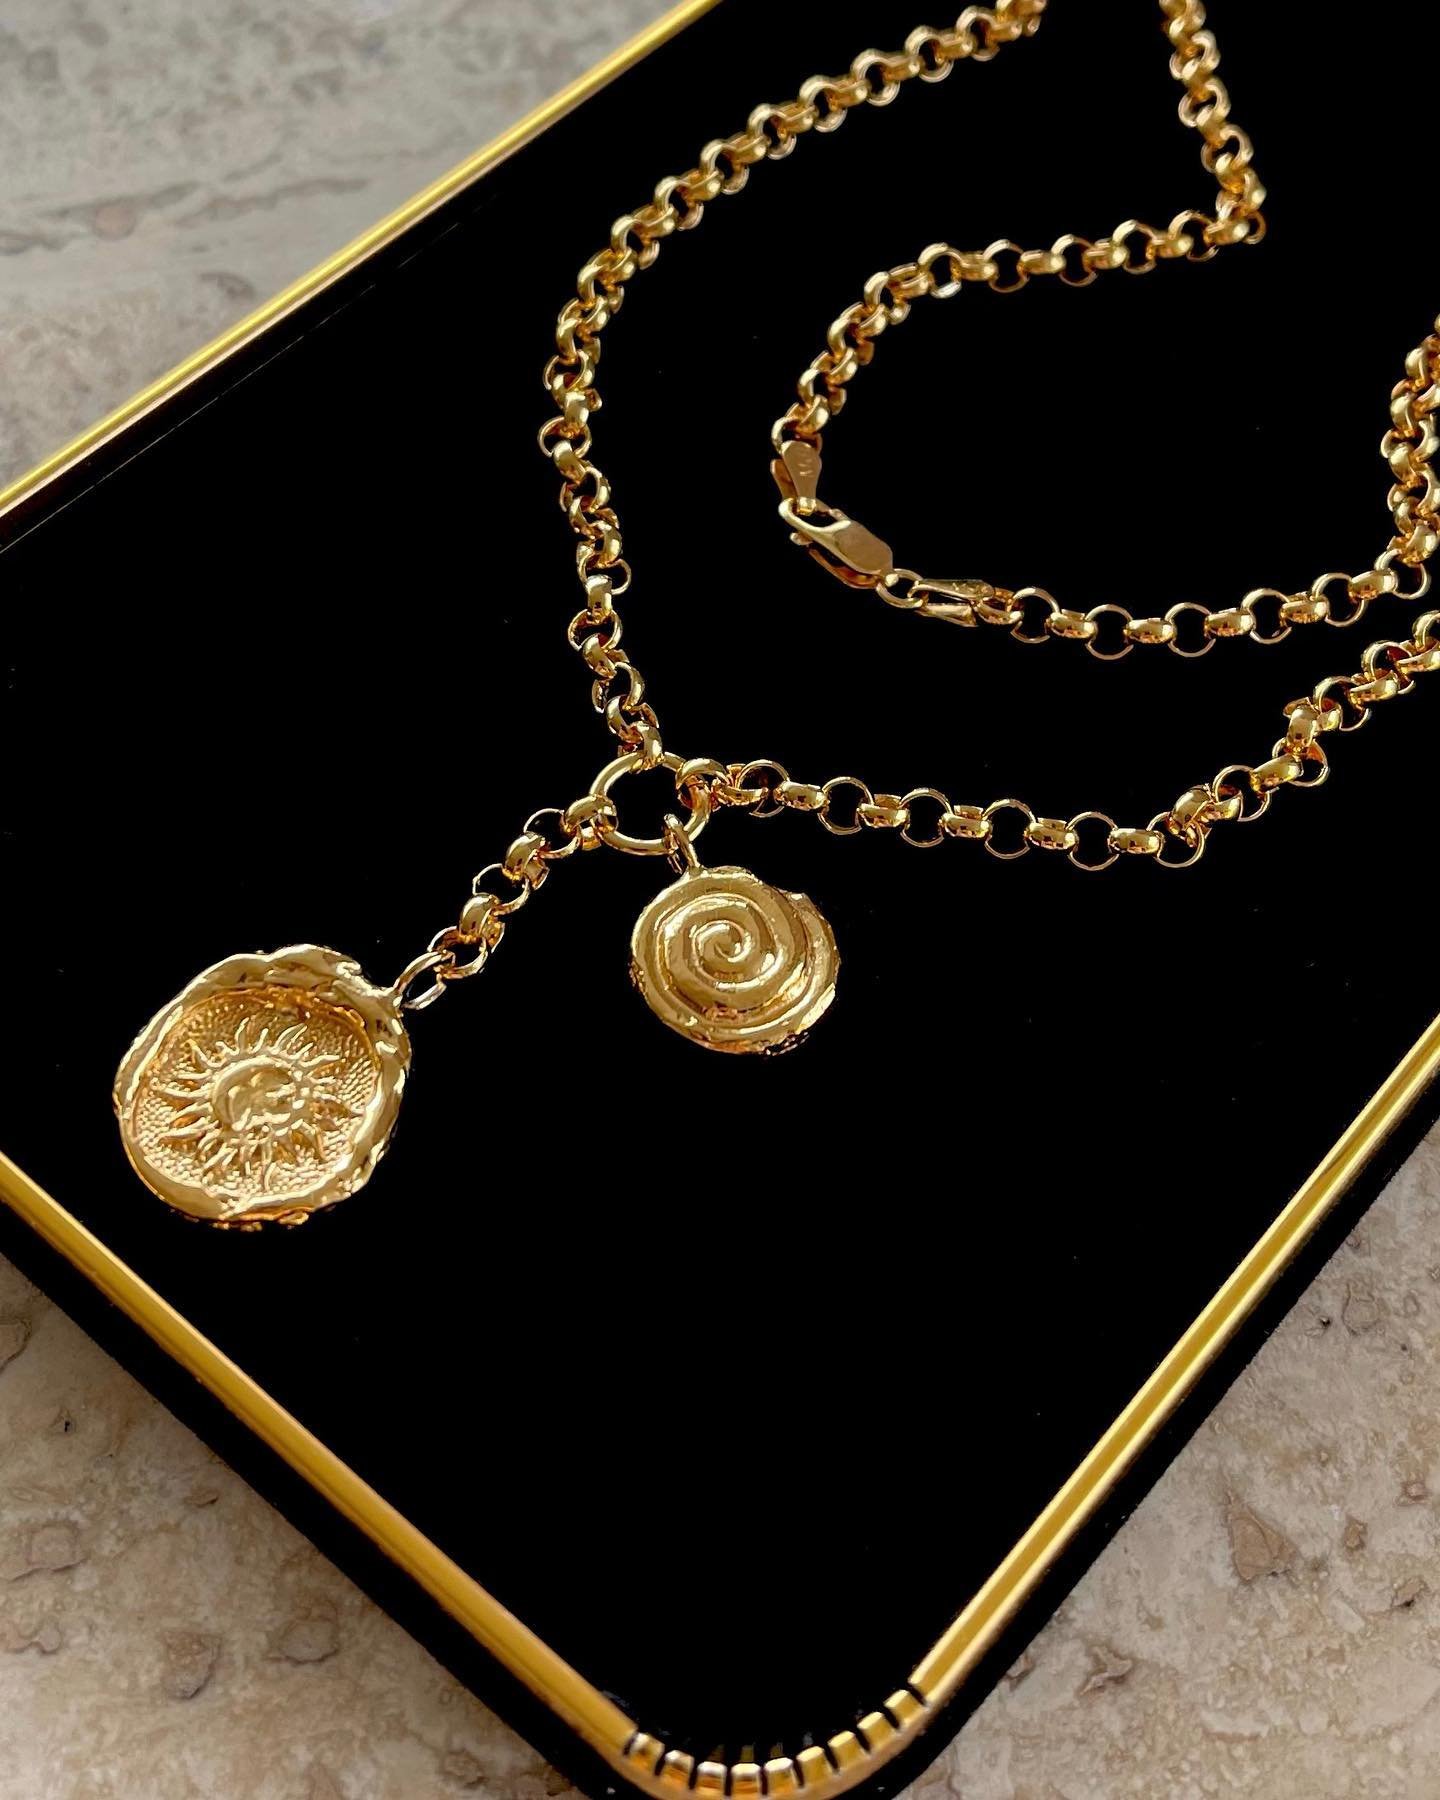 Well Travelled Adornments

Pamela Card Jewelry&rsquo;s vision is to instil desire in women and men to discover the beauty of the world with travel inspired golden adornments that blend the ancient world with the modern world.

The Riviera necklace is